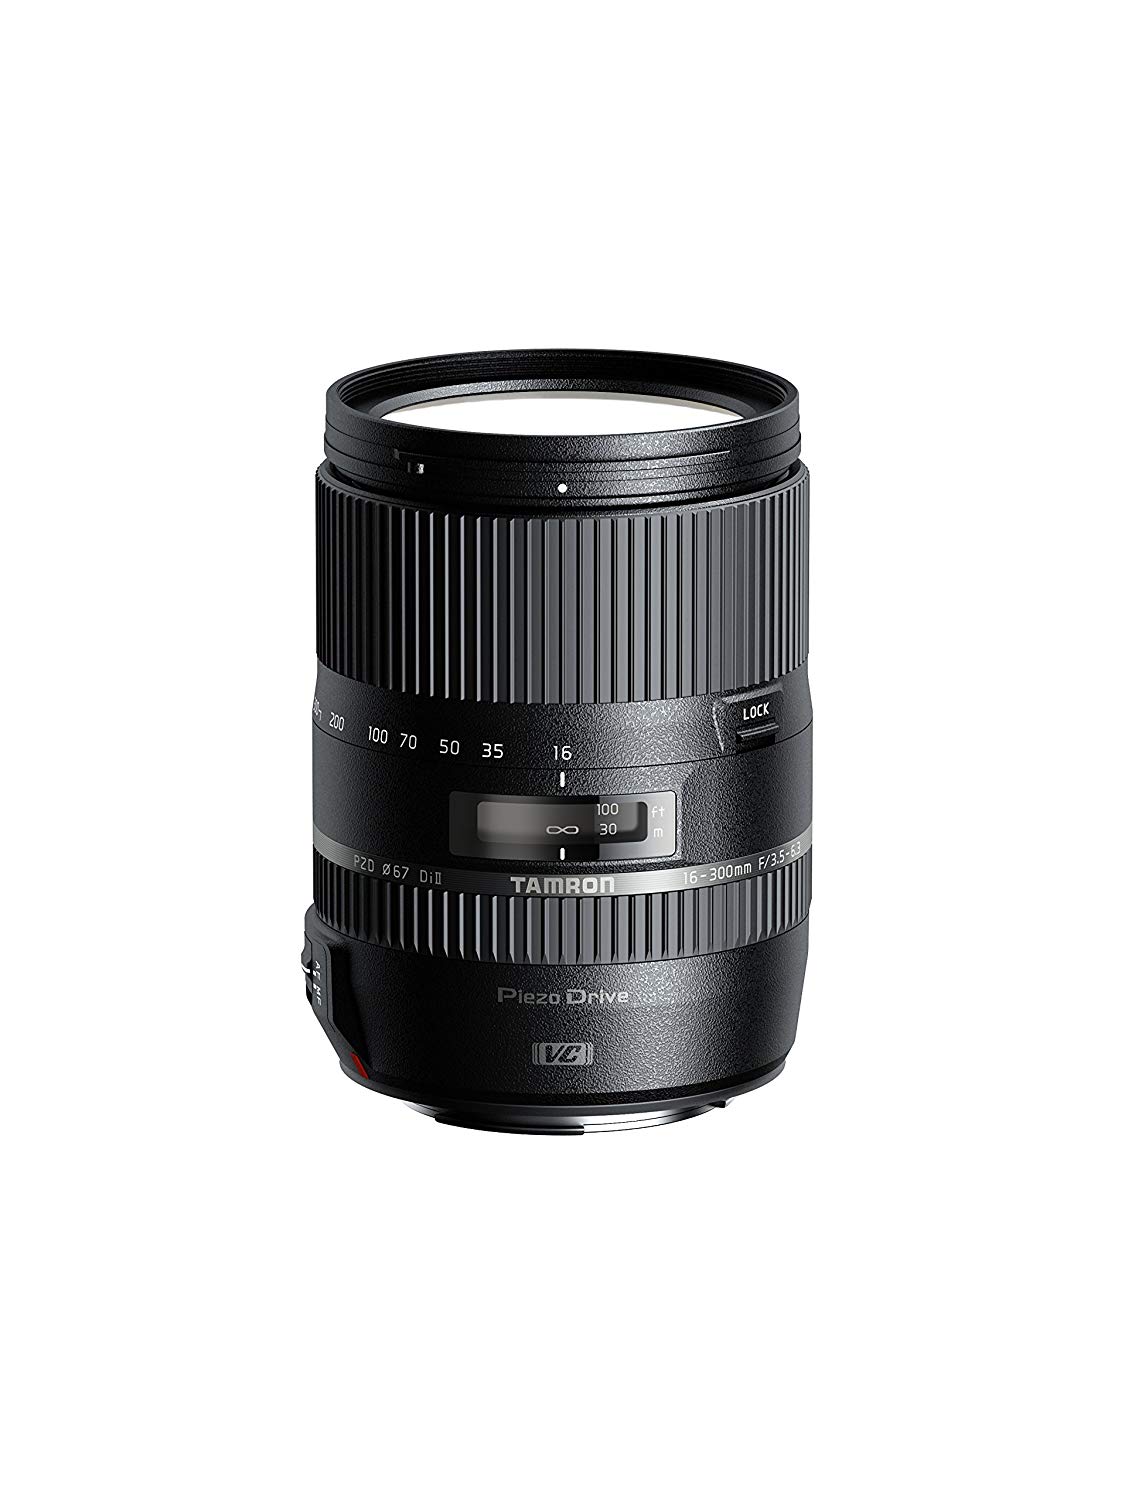 Tamron AFB016C700 16-300 F / 3.5-6.3 Di II VC PZD Macro 16-300mm IS Objectif interchangeable pour appareils photo Canon EF-S